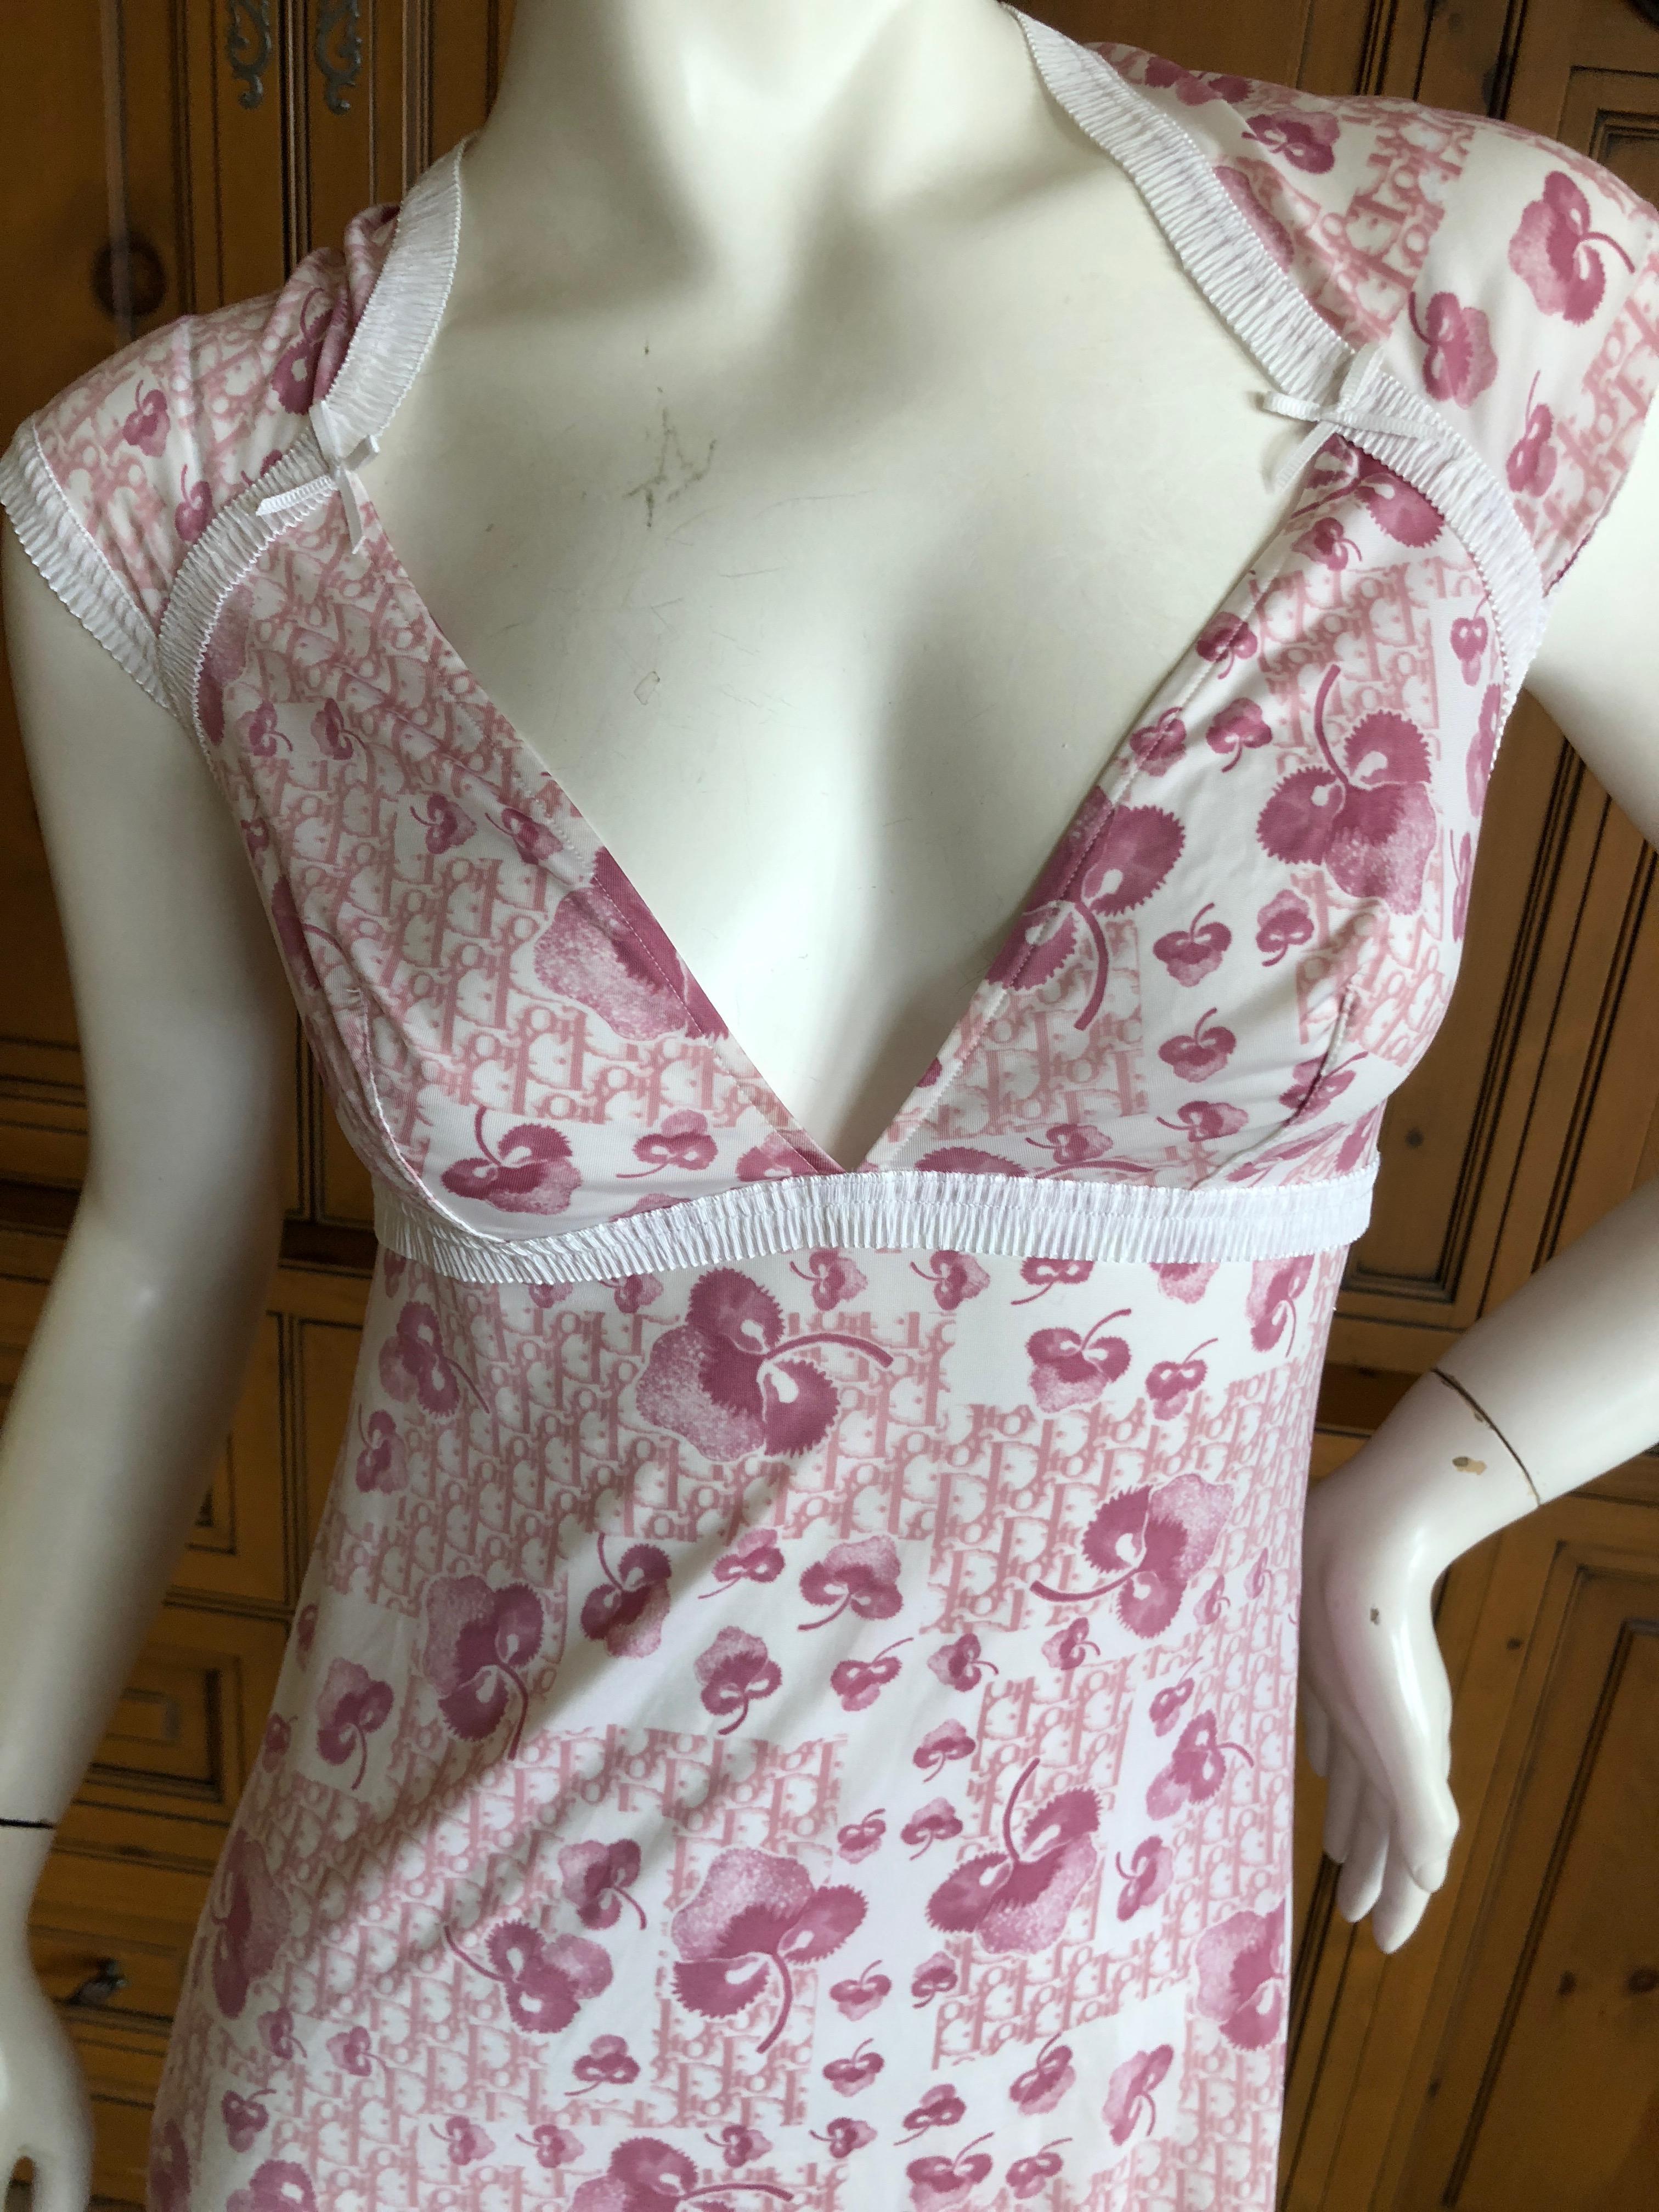 Christian Dior Lingerie by John Galliano Cherry Blossom Pattern Logo Dress In Excellent Condition For Sale In Cloverdale, CA